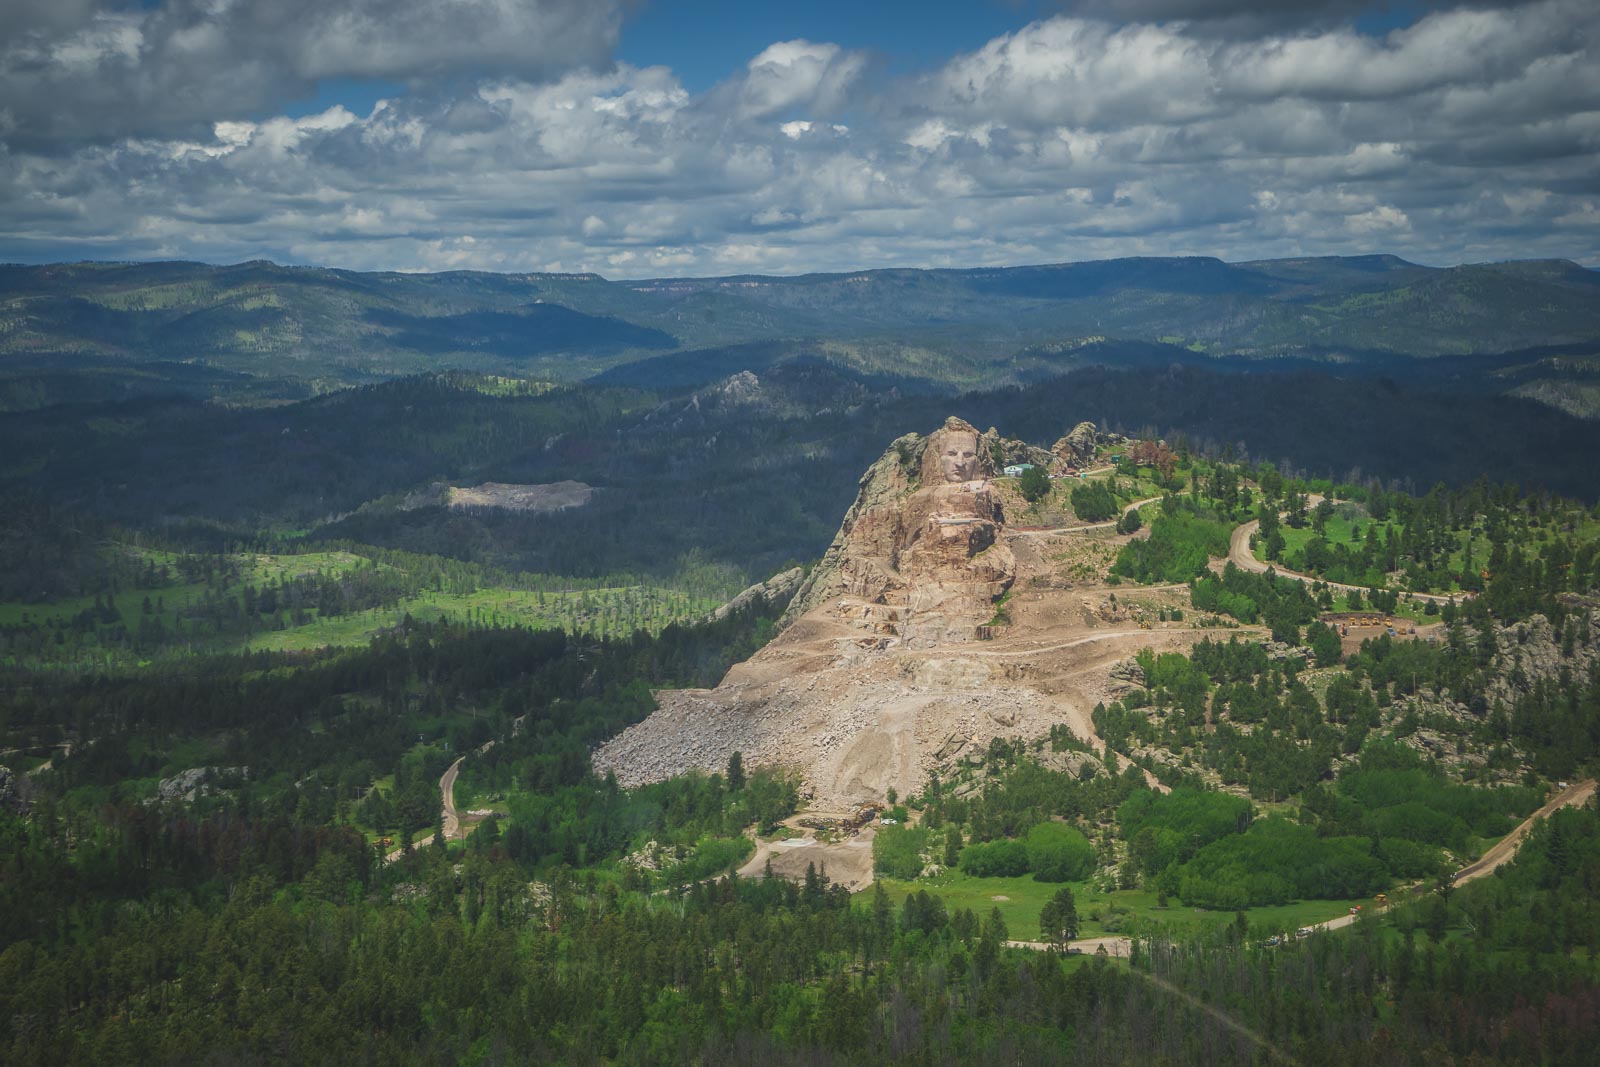 crazy horse memorial face from helicopter